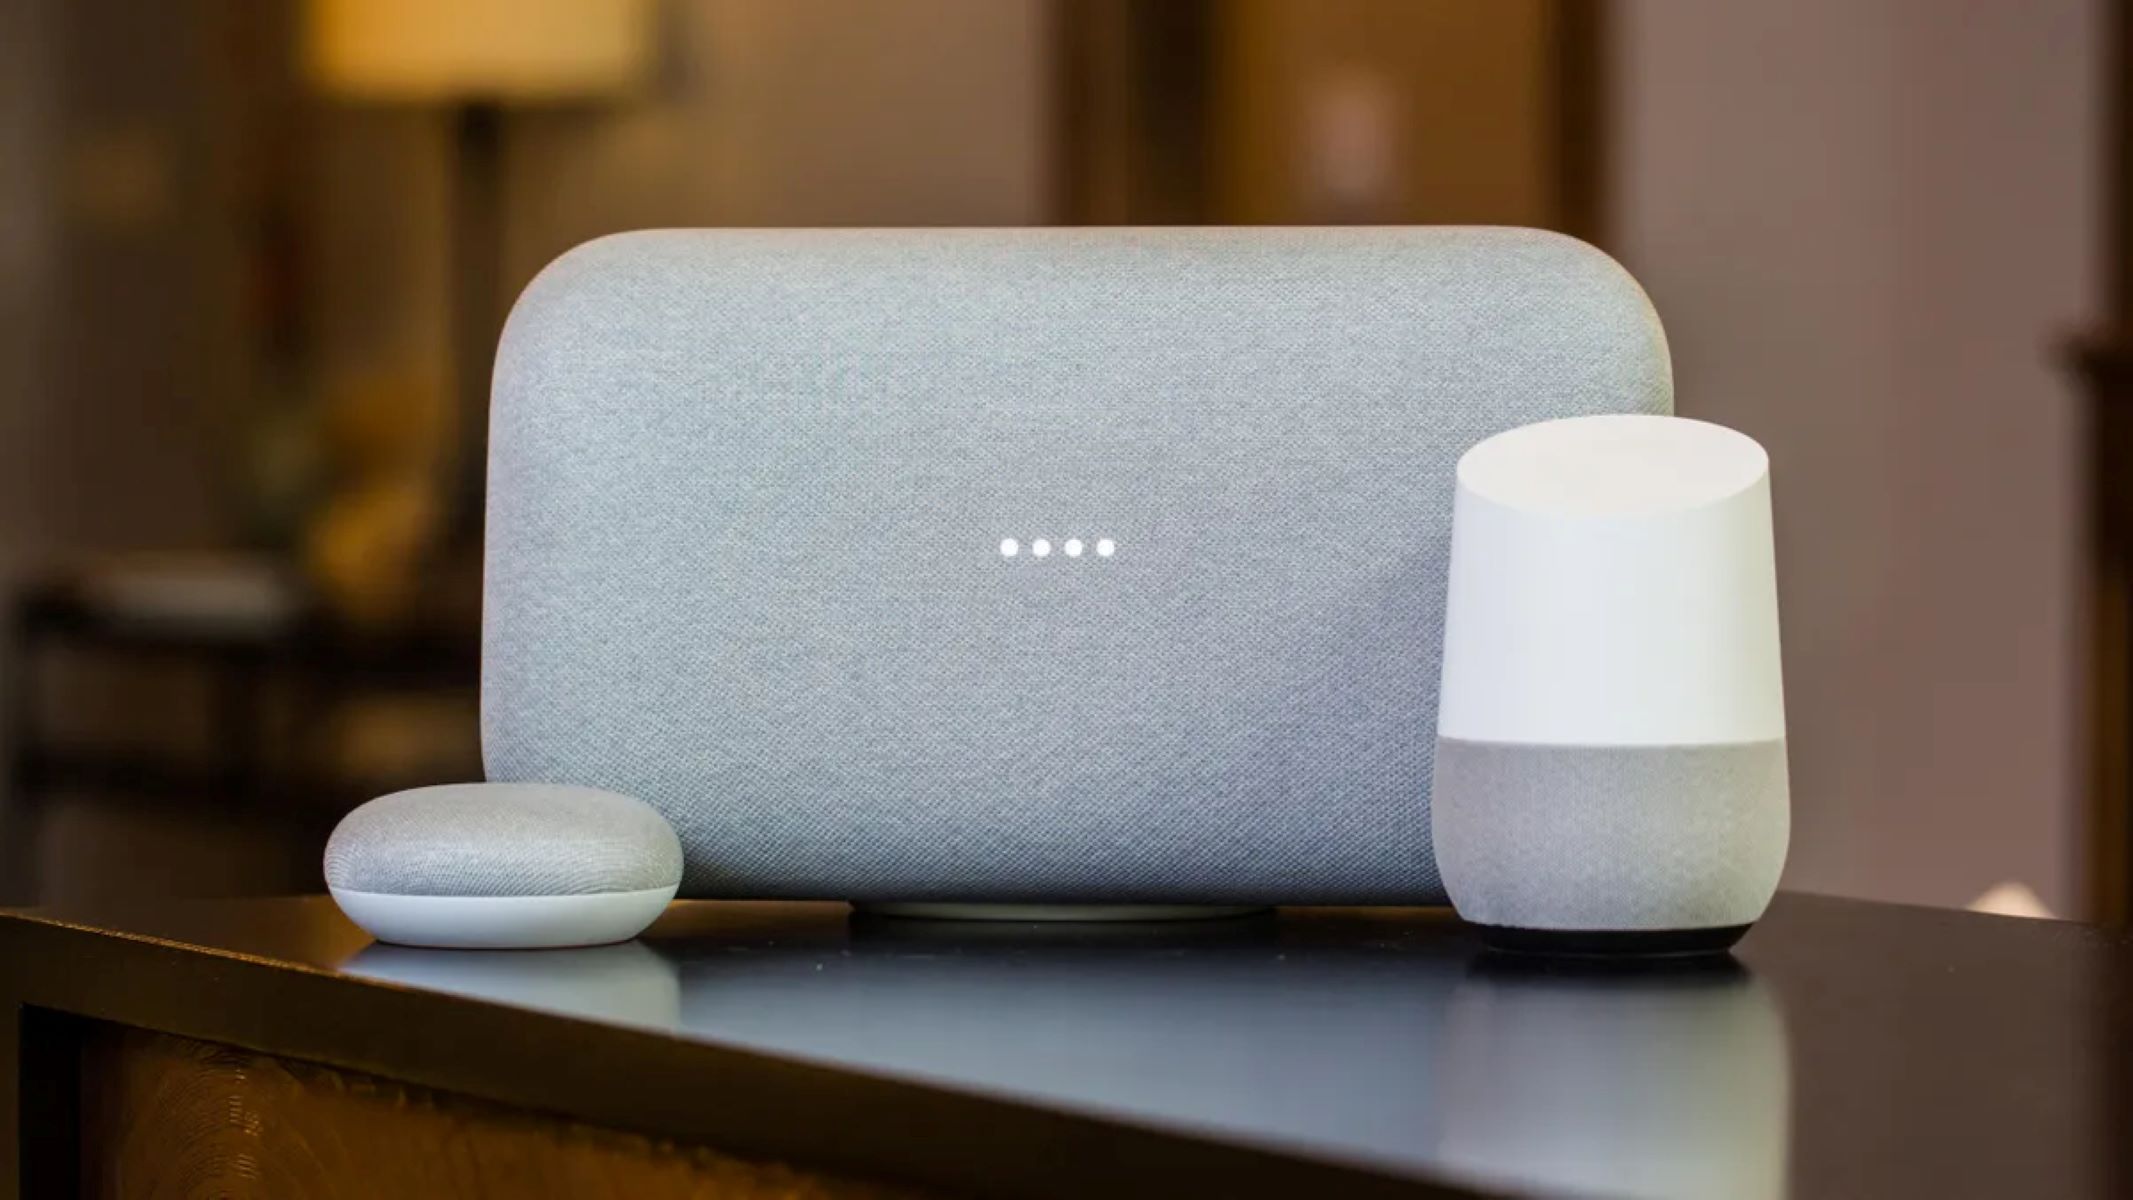 How To Make Your Home A Smart Home With Google